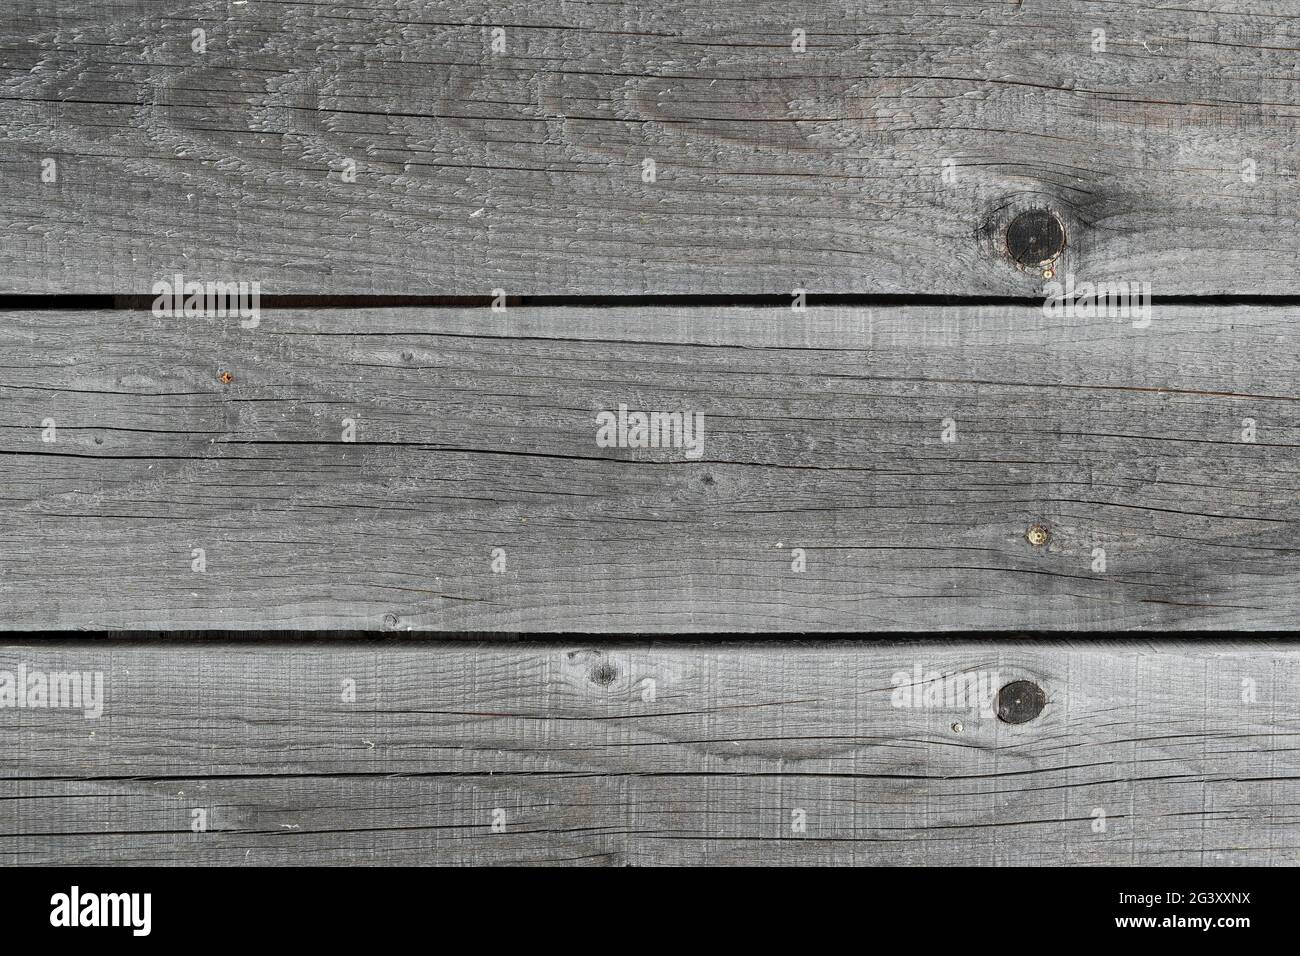 The texture of old rough wooden planks, cracked by time and weather. Stock Photo